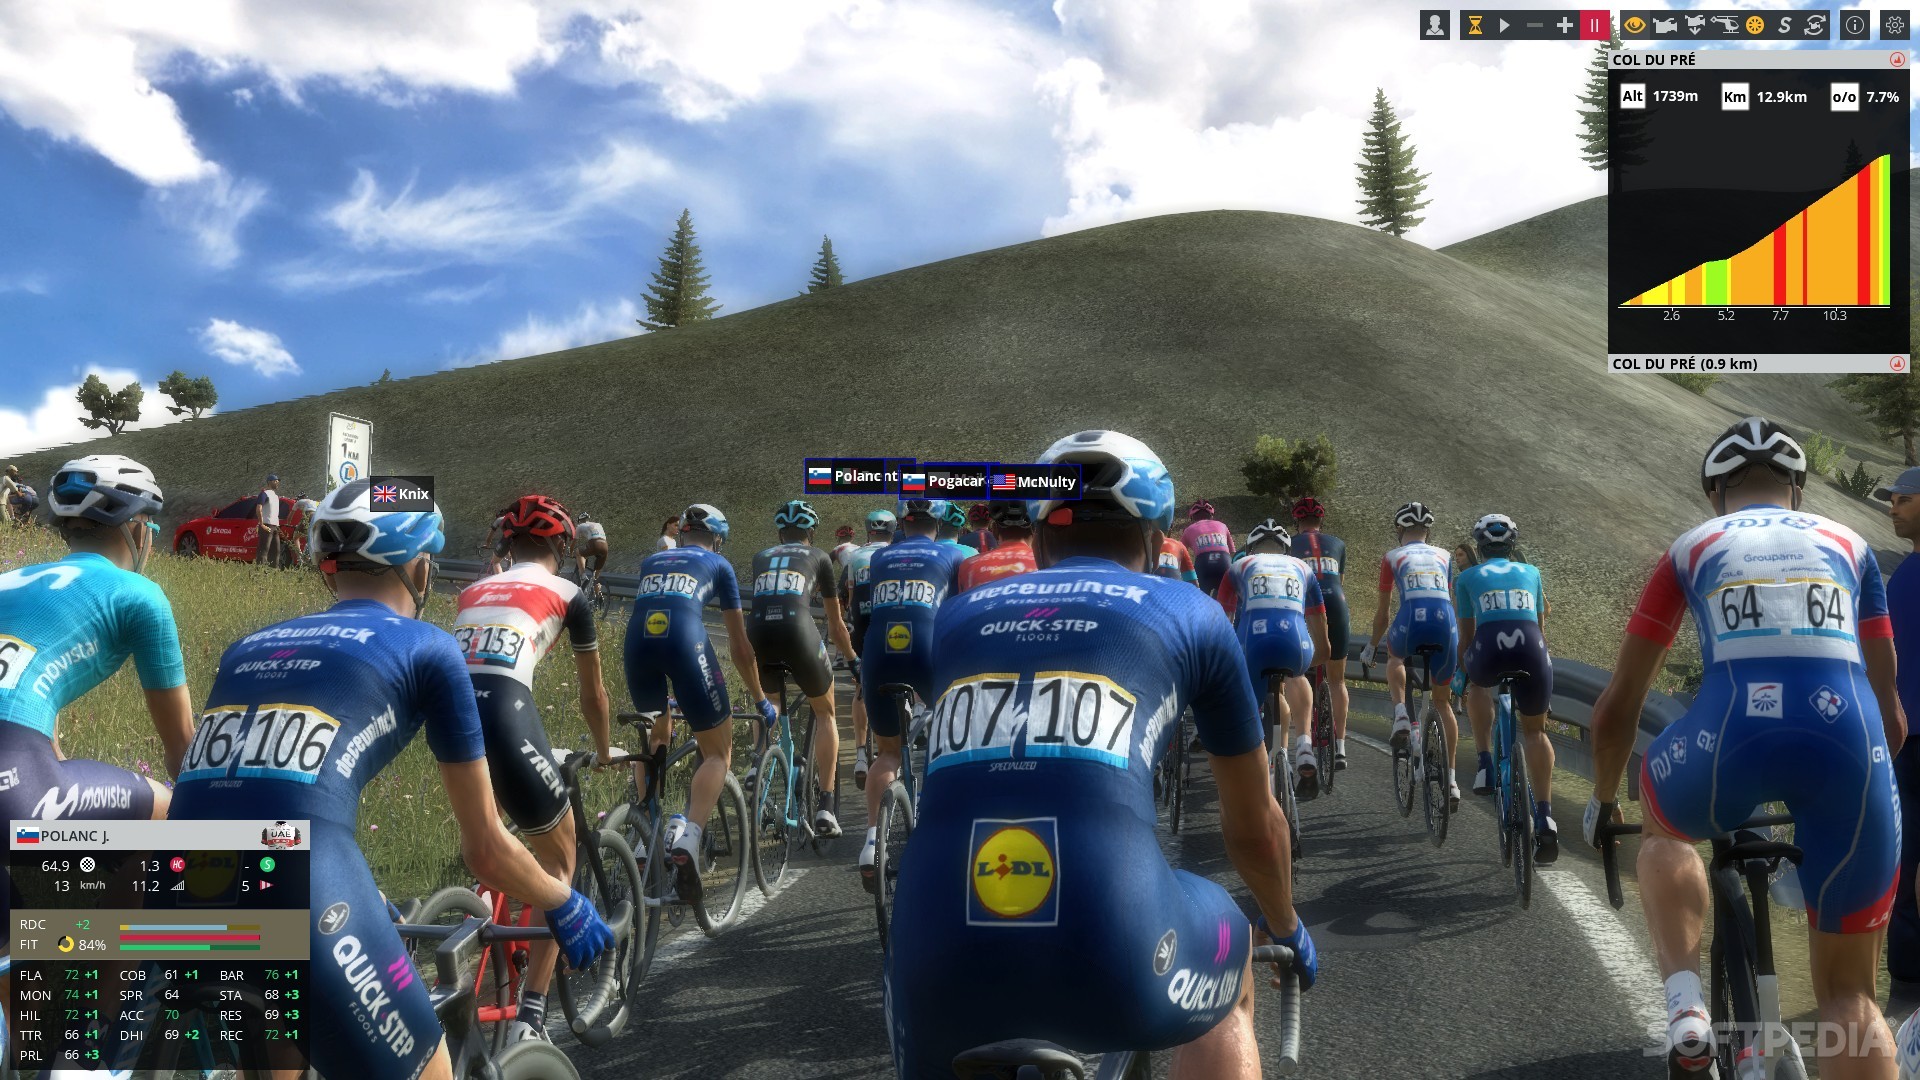 Pro Cycling Manager 2021 - Rider Ratings 